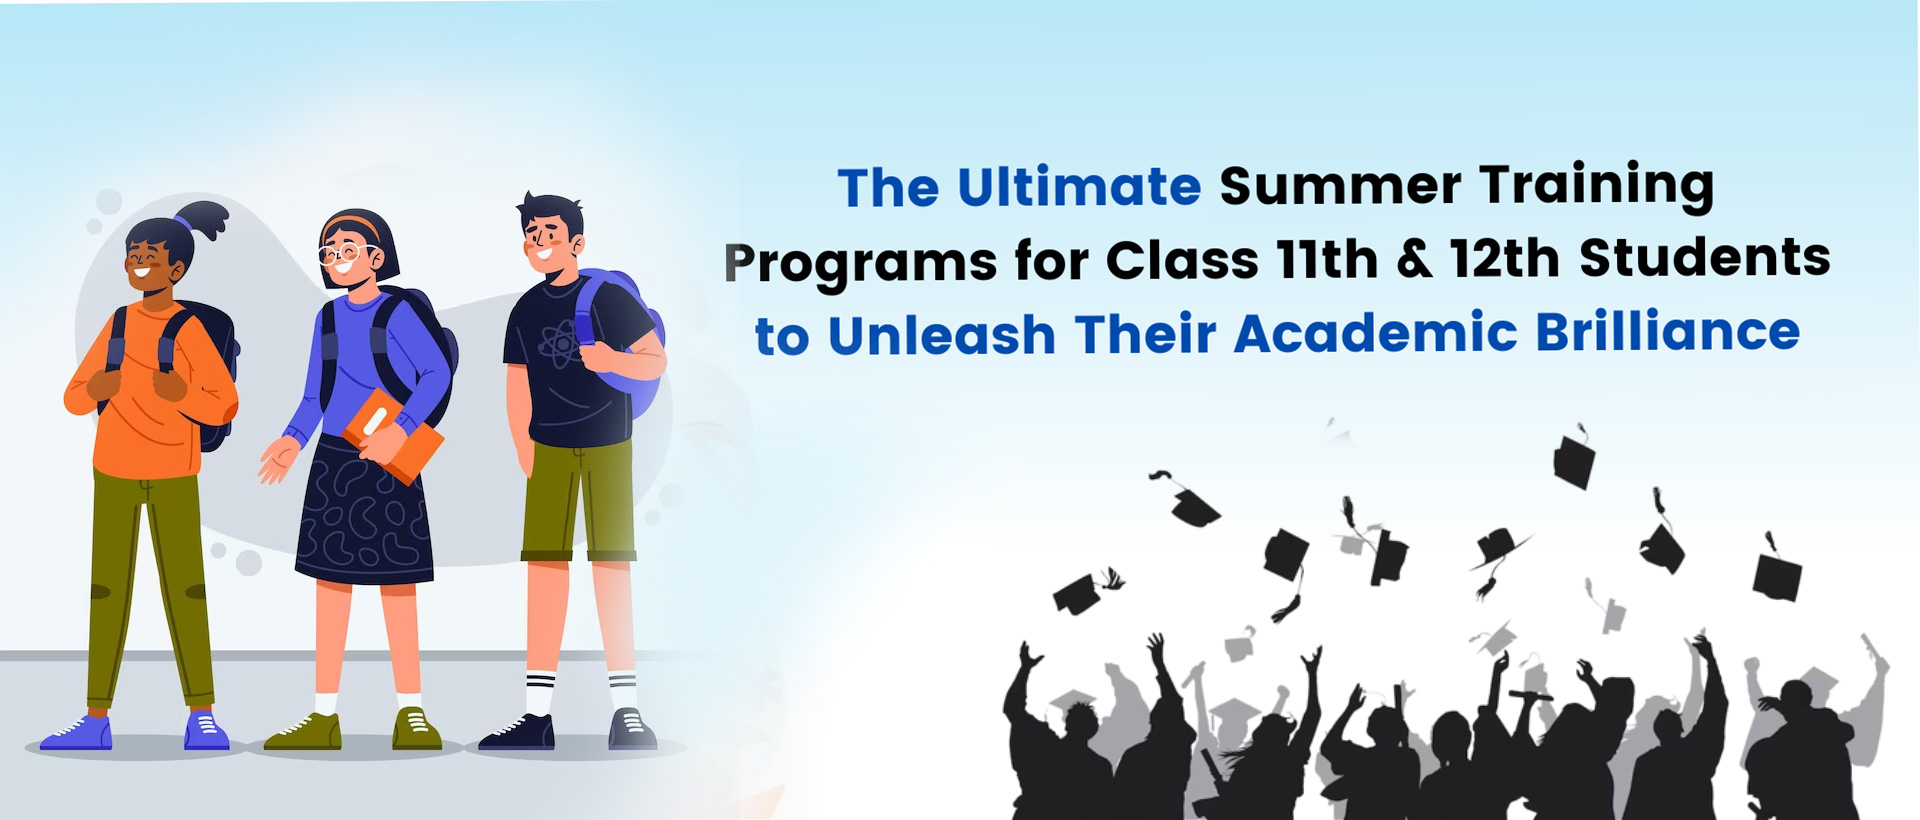 The Ultimate Summer Training Programs for Class 11th & 12th Students to Unleash Their Academic Brilliance